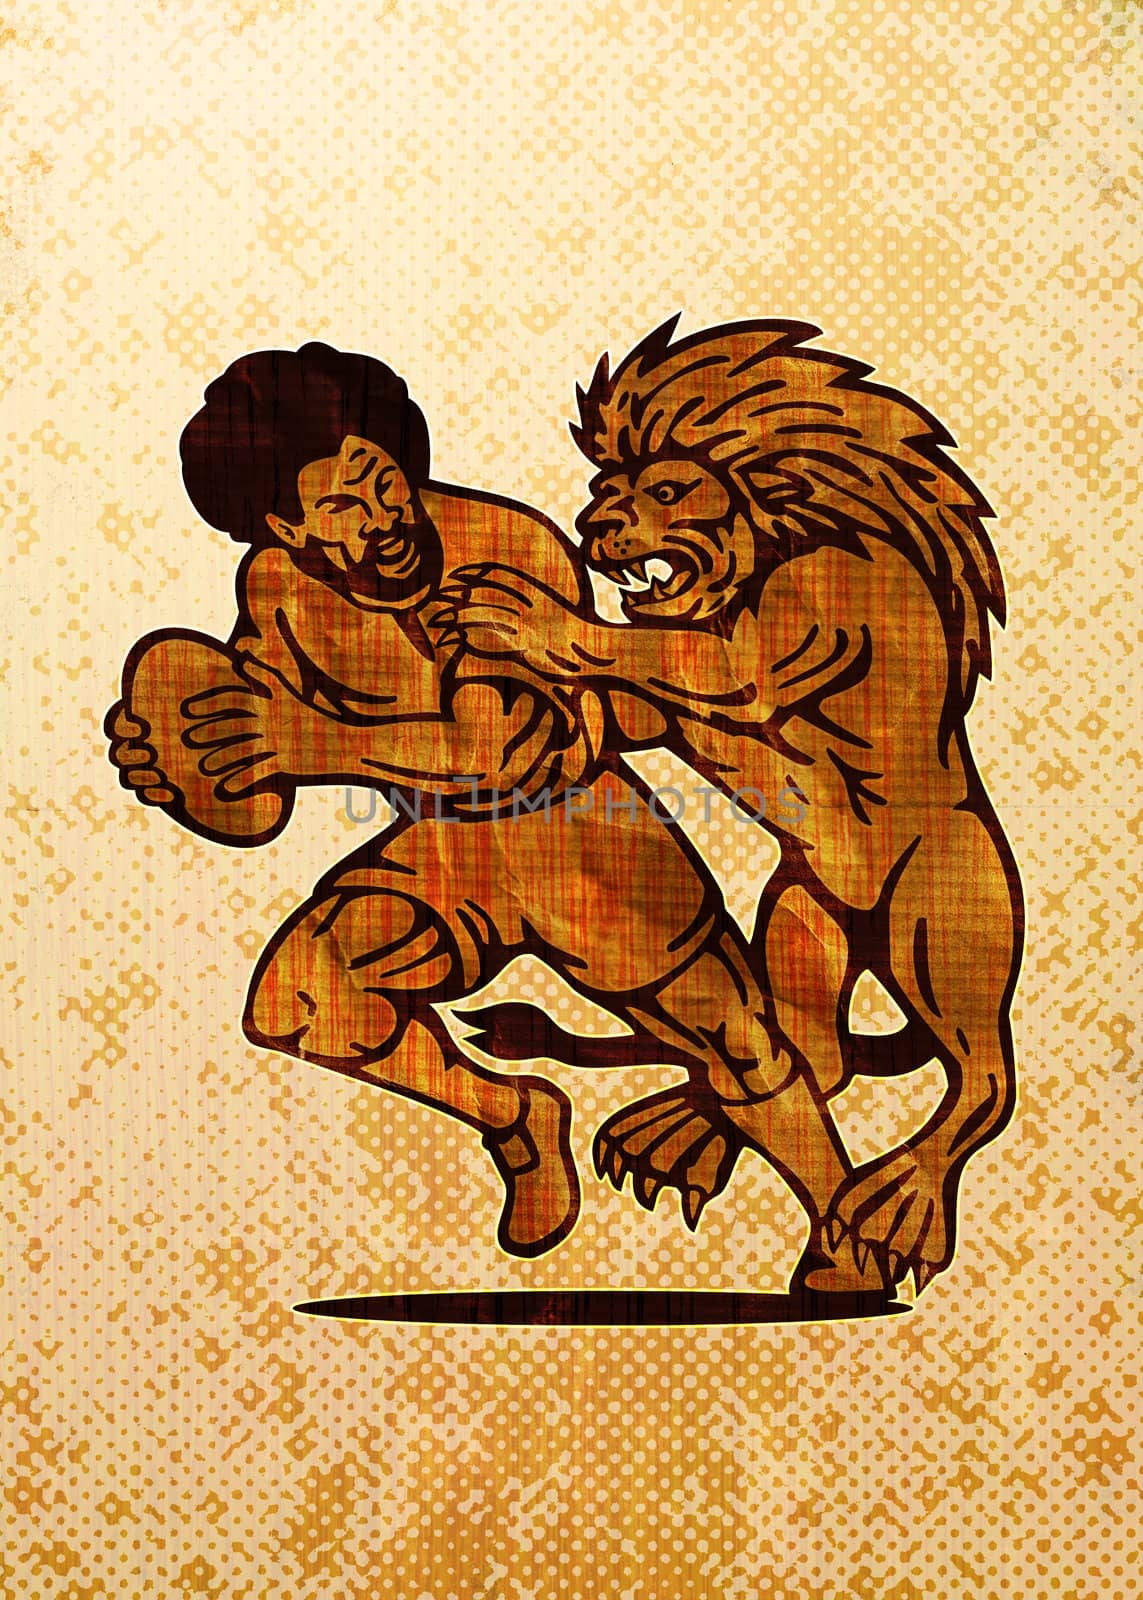 illustration of  a Rugby player running with ball attack by lion with grunge and wood grain texture background